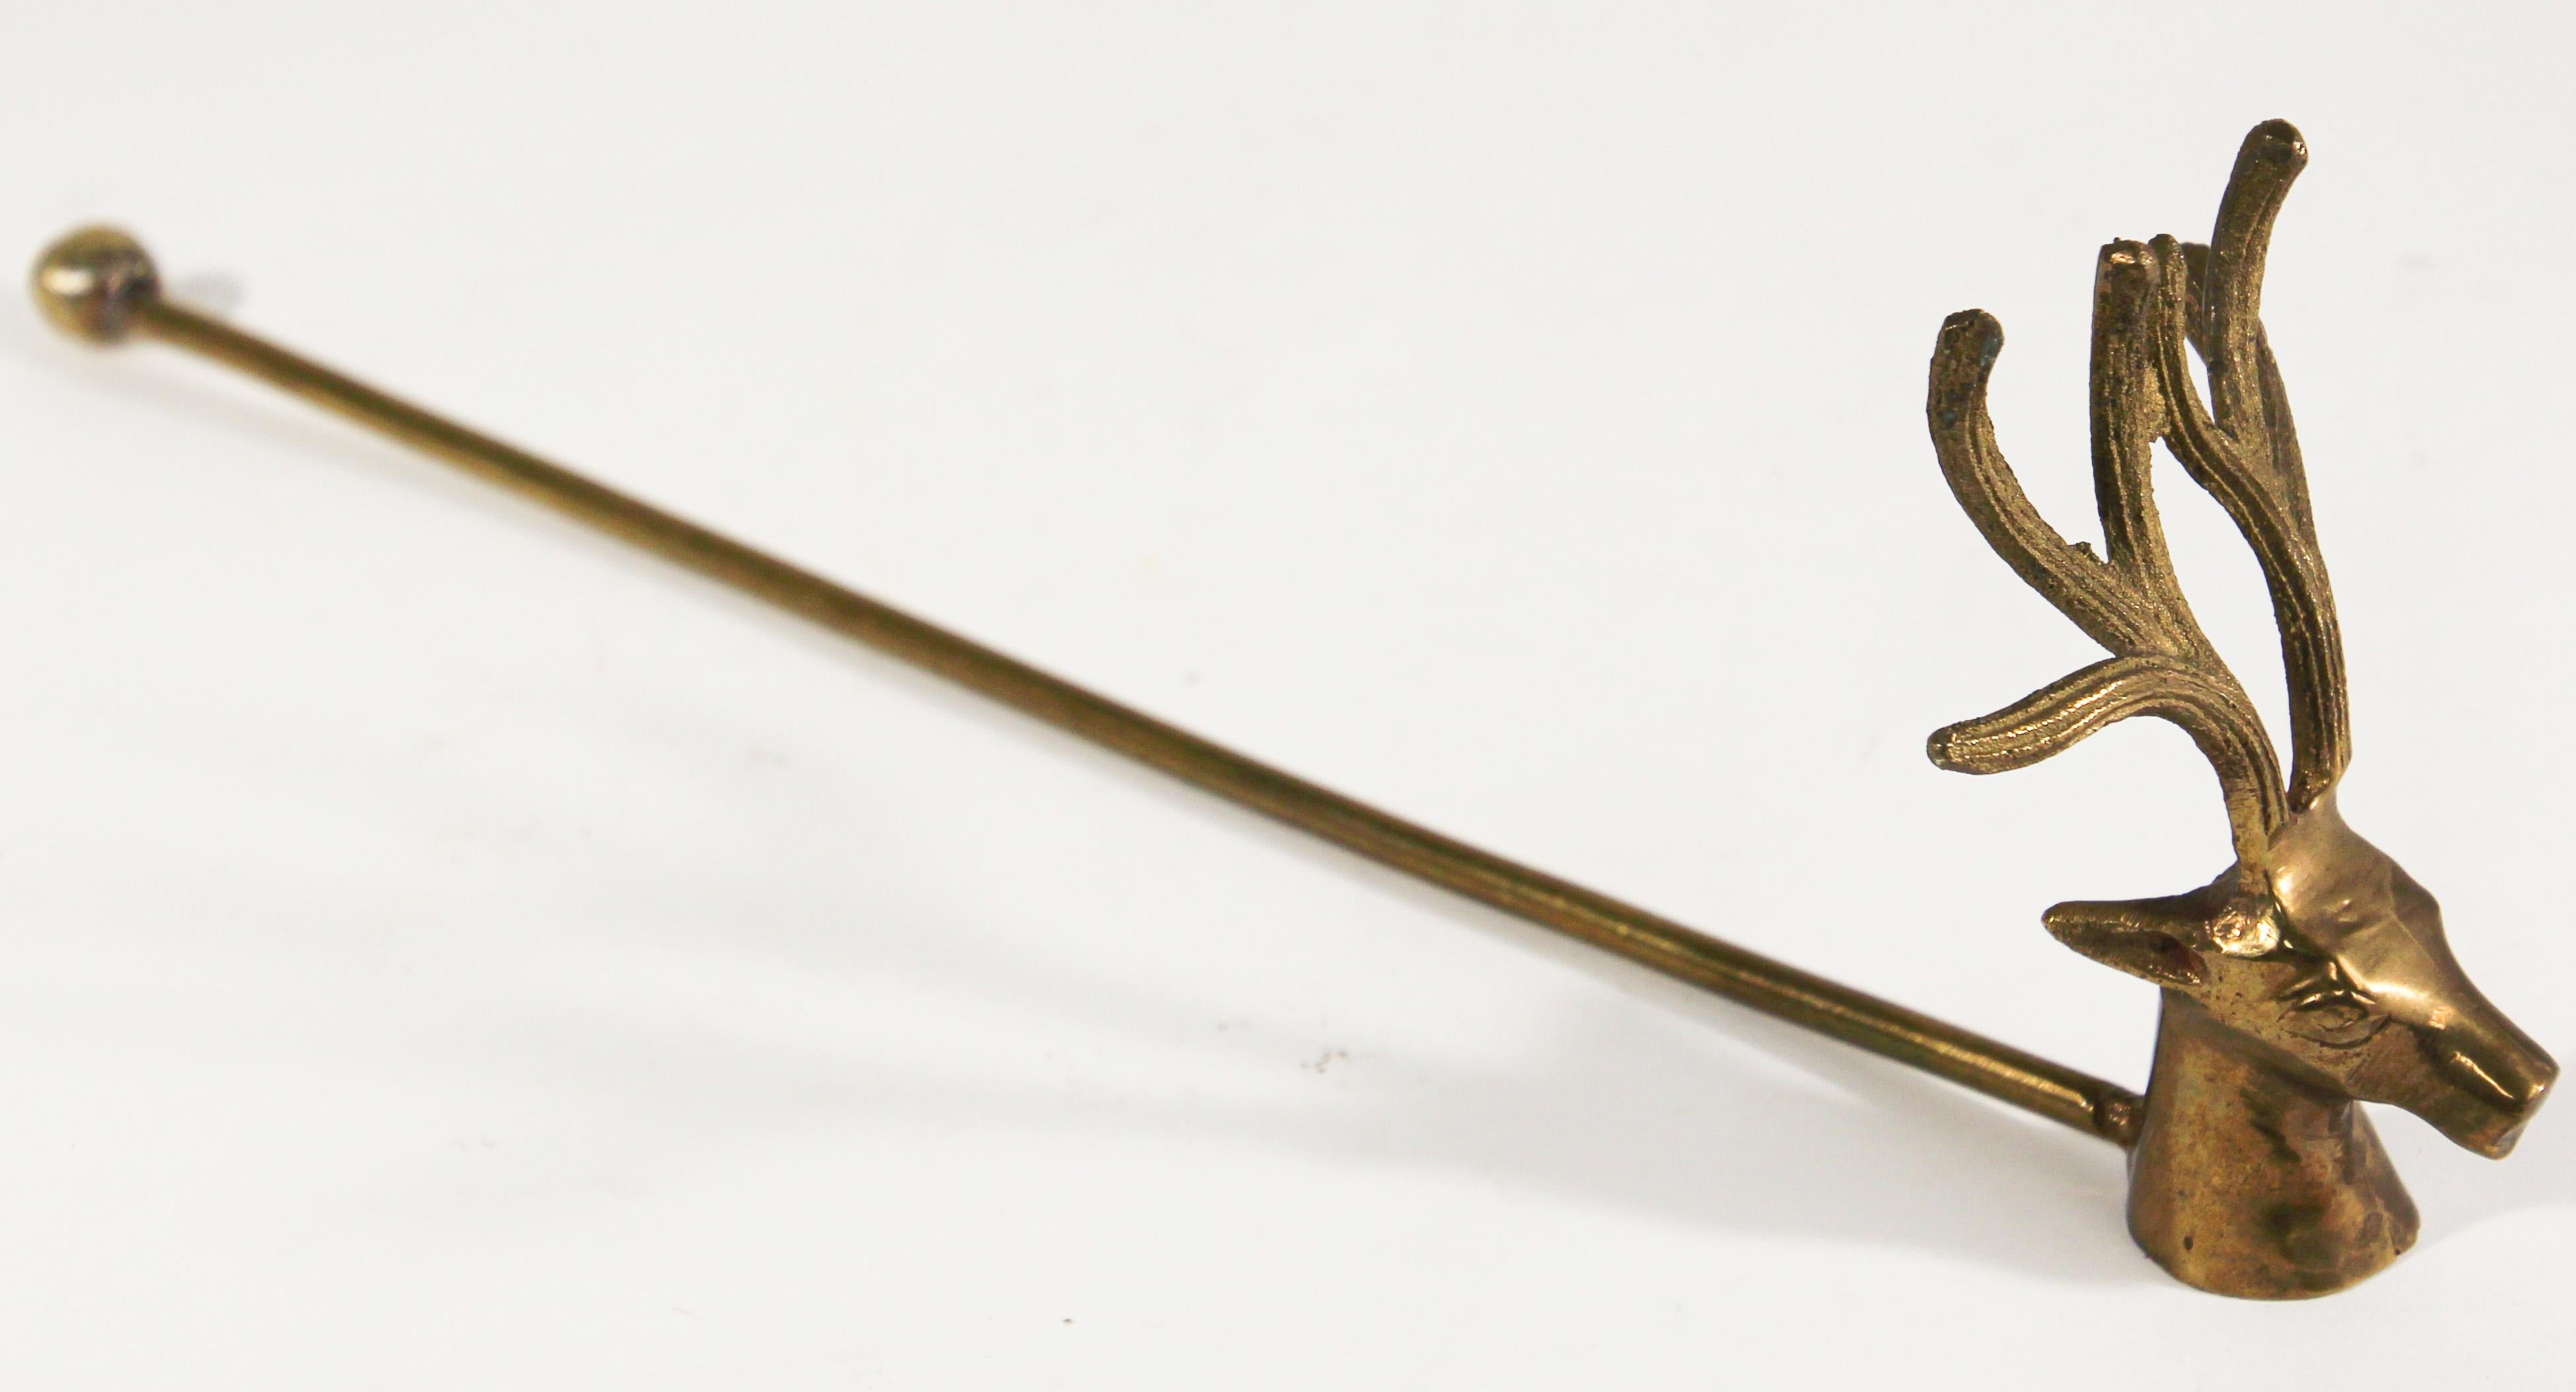 Vintage Victorian polished brass candle snuffer with deer head.
This brass stag head candle snuffer is perfect for display and use, it will add a festive mood during the holidays or all year round. 
Size: 11.5” L x 3.75” H at tip of antlers x